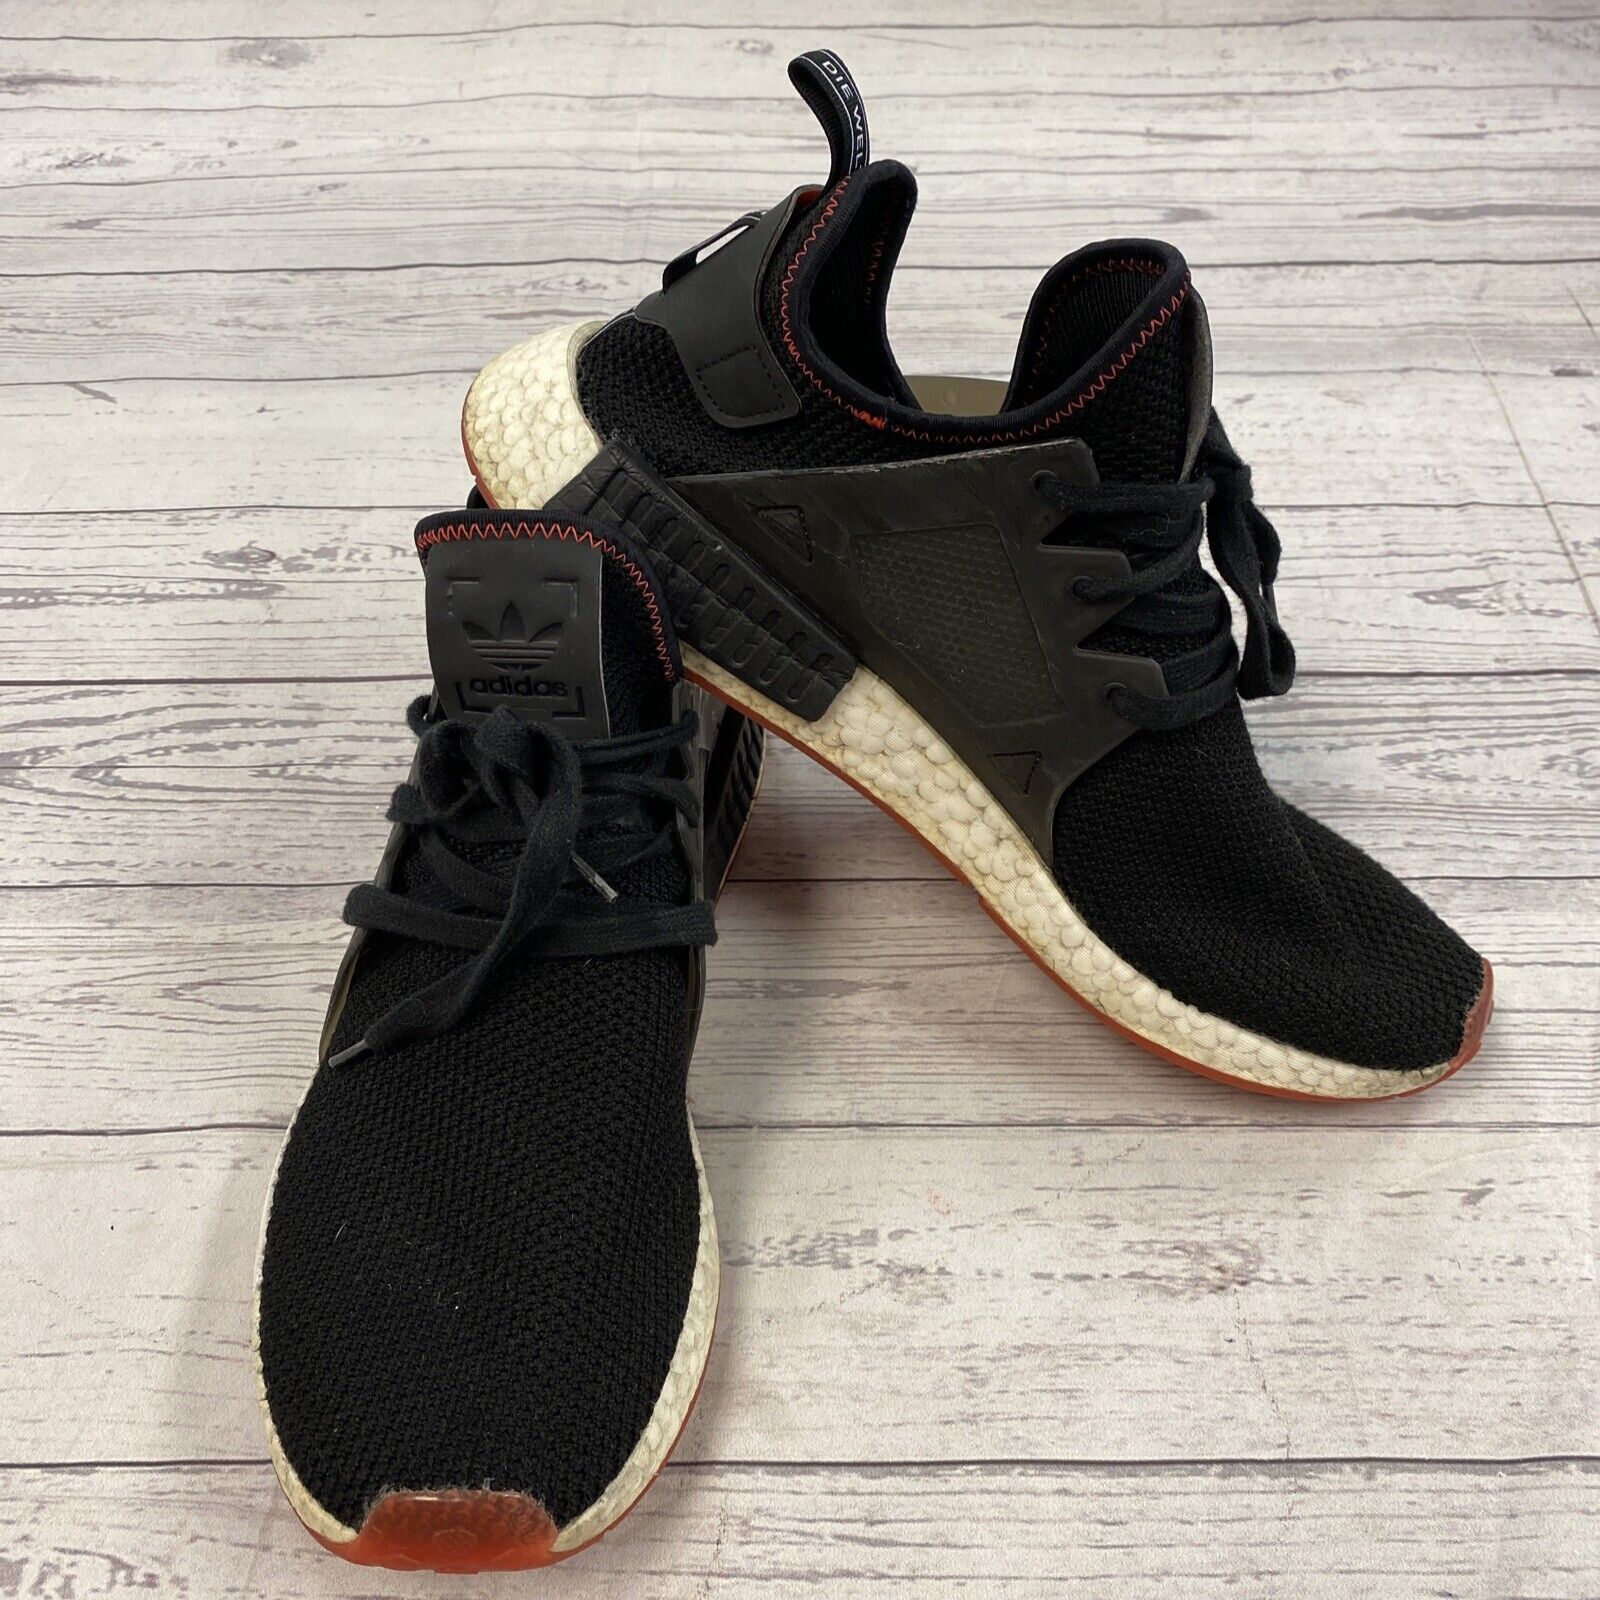 råd lindre Stige Adidas Nmd XR1 BY9924 Black Solar Red Boost Running Shoes Sneakers Men -  beyond exchange